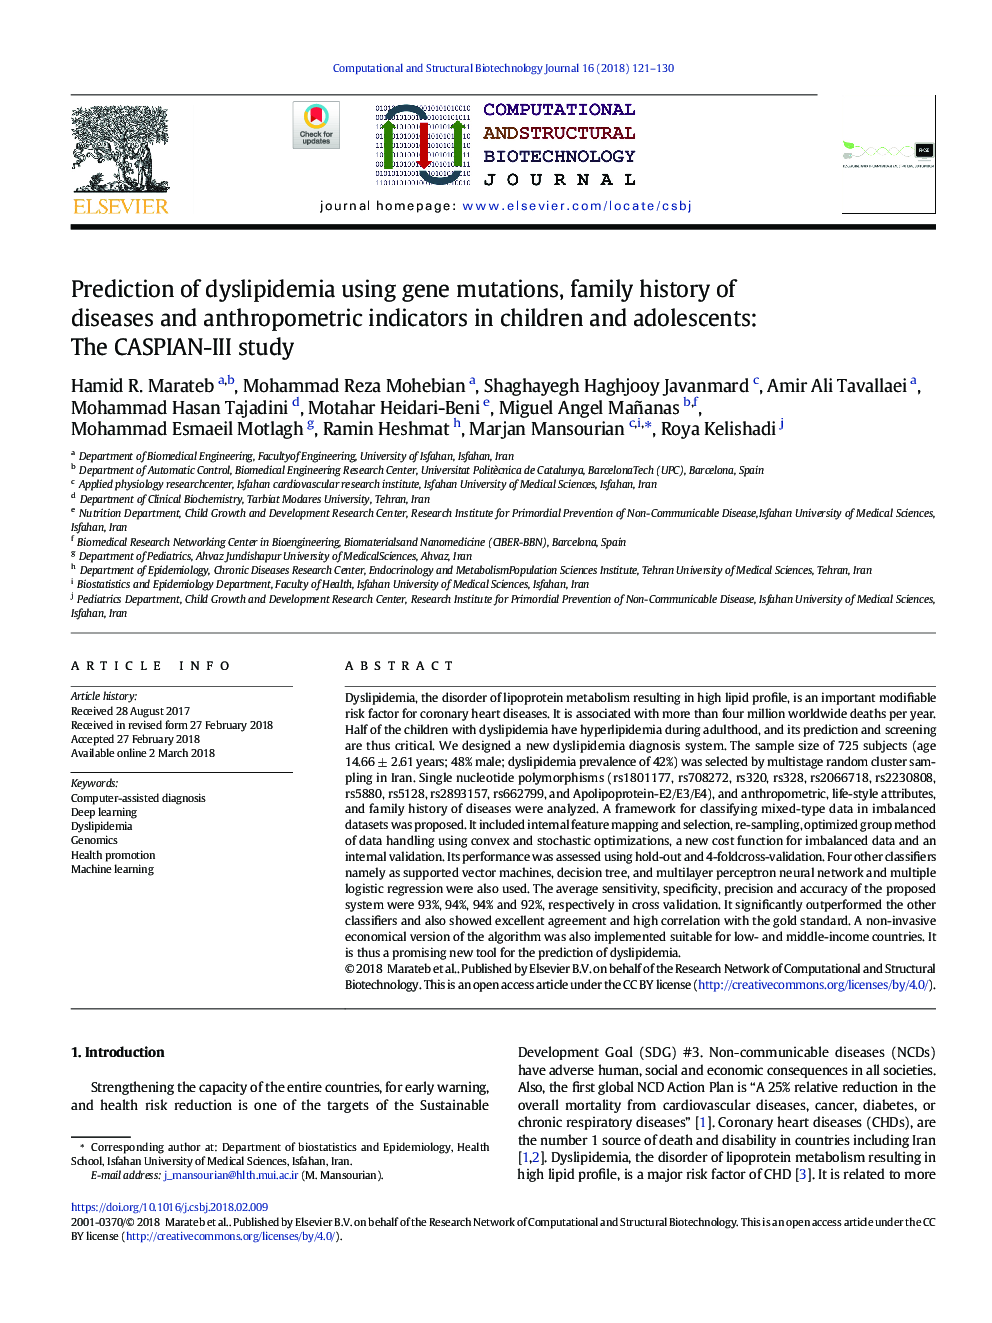 Prediction of dyslipidemia using gene mutations, family history of diseases and anthropometric indicators in children and adolescents: The CASPIAN-III study